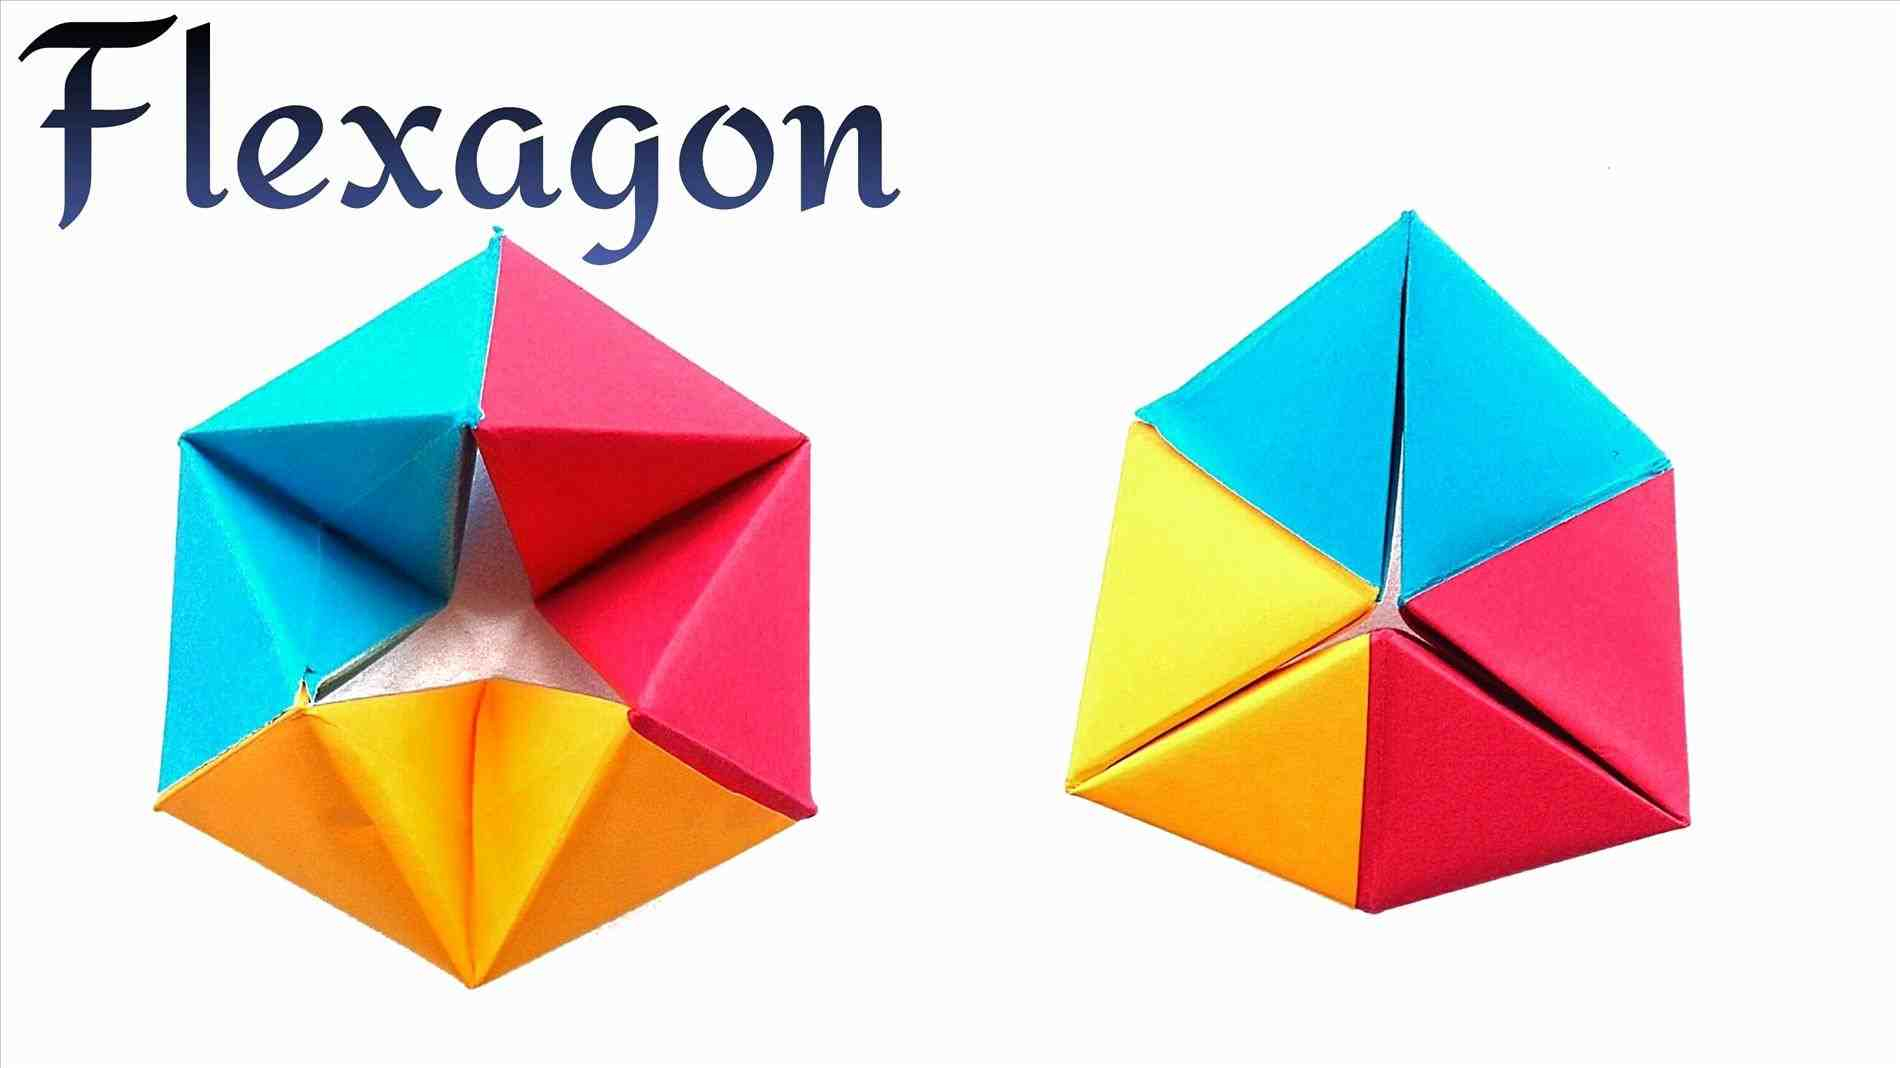 How To Make Cool Origami Toys To Make New Spinning Top Toy Video Tutorial An Blow Toy Spin And How